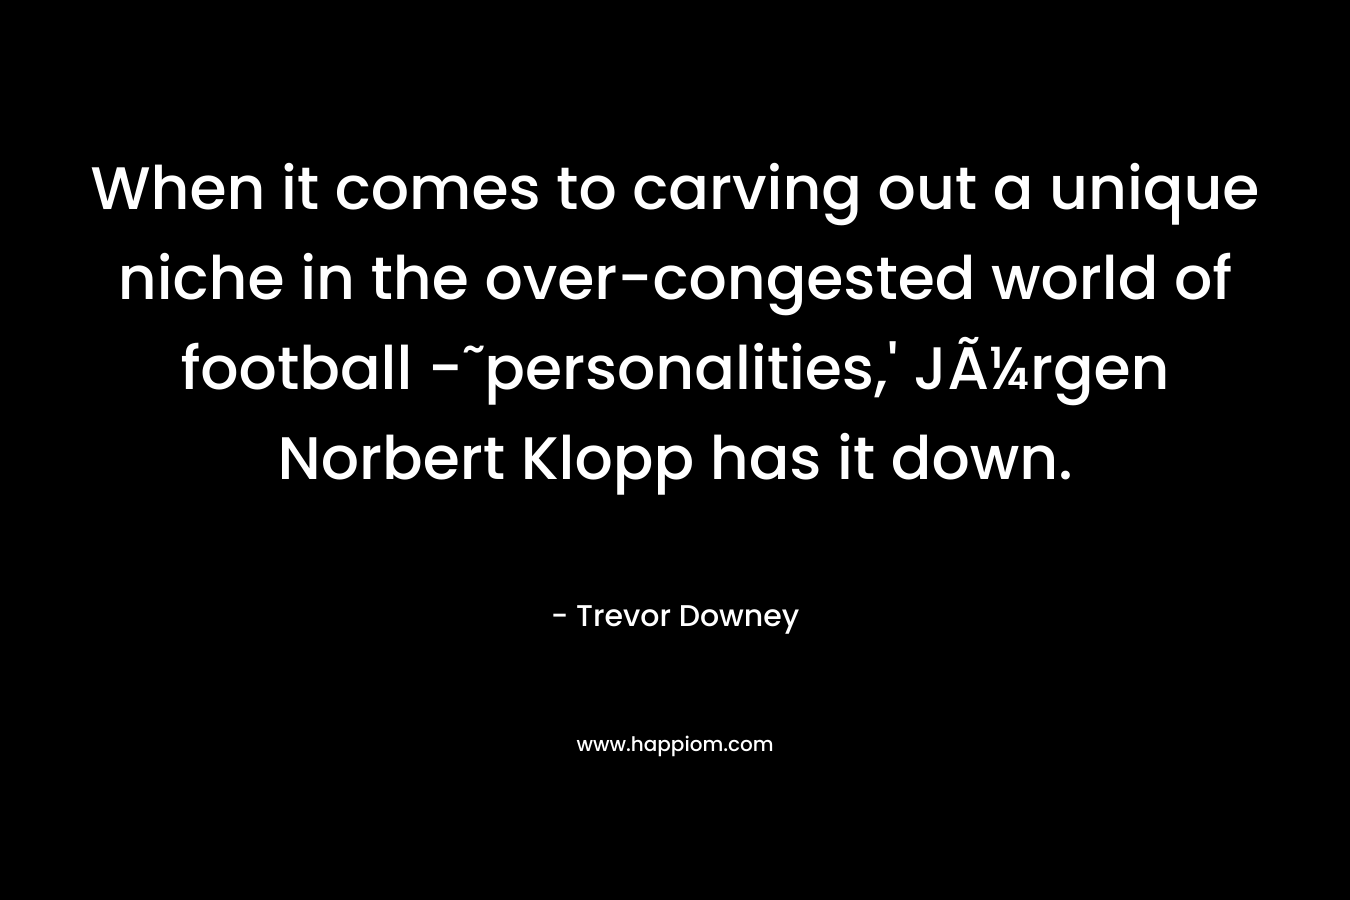 When it comes to carving out a unique niche in the over-congested world of football -˜personalities,’ JÃ¼rgen Norbert Klopp has it down. – Trevor Downey